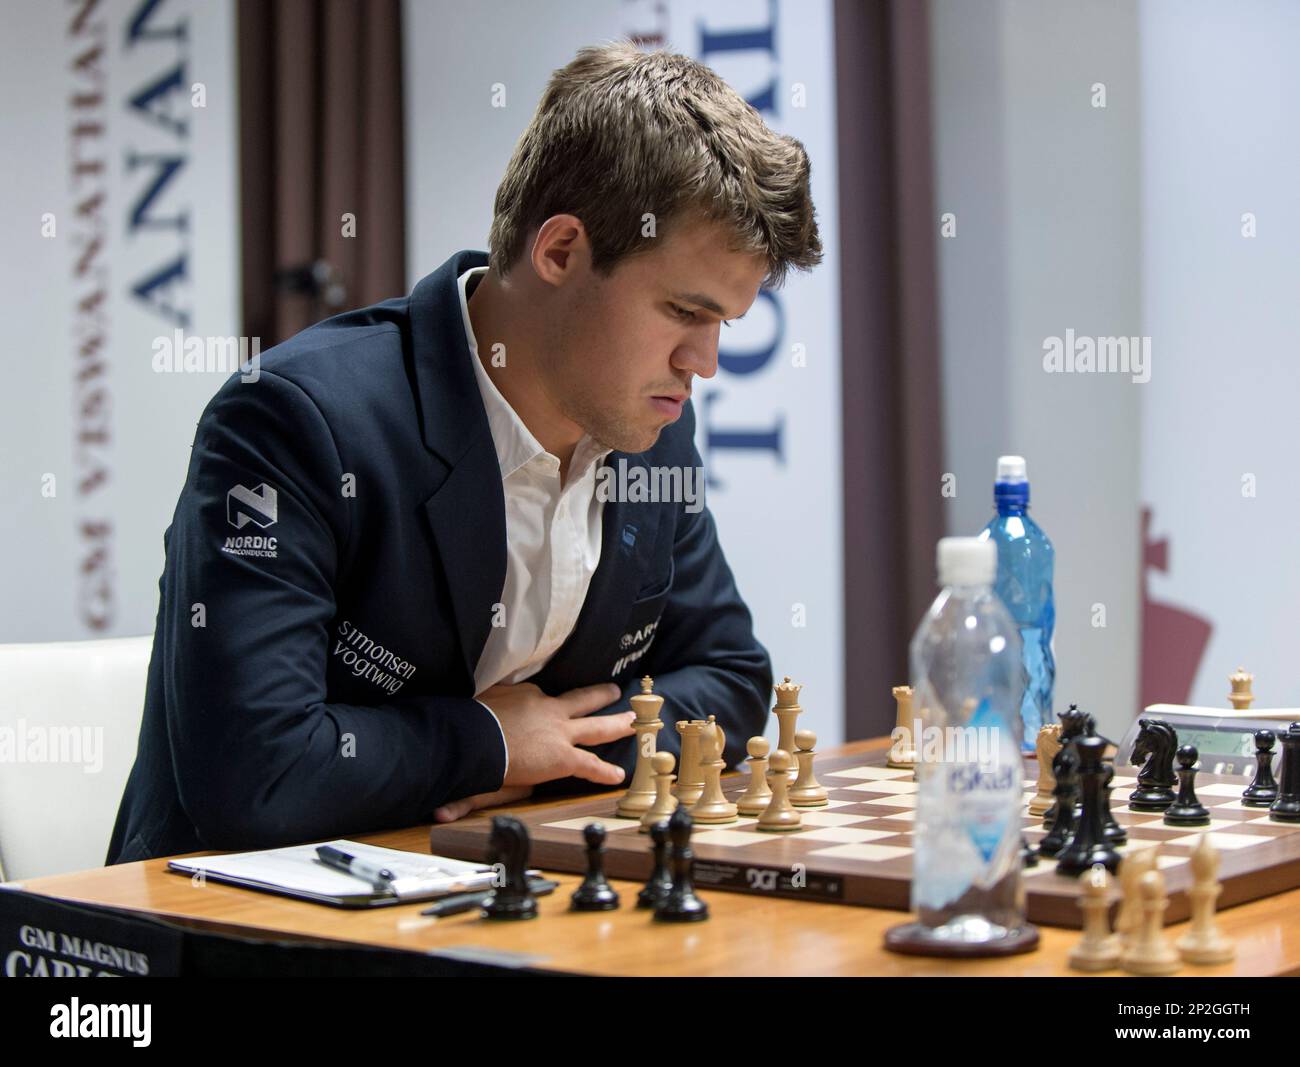 https://c8.alamy.com/comp/2P2GGTH/aug25-2015-st-louis-missouri-us-gm-magnus-carlsen-ranked-number-one-in-the-world-plays-on-day-three-of-the-third-annual-sinquefield-cup-at-the-chess-club-and-scholastic-center-of-st-louis-ten-of-the-worlds-top-chess-grandmasters-are-competing-for-more-than-one-million-dollars-in-prize-money-in-this-years-cup-the-second-stop-on-the-inaugural-three-tournament-grand-chess-tour-for-the-first-time-ever-the-united-states-is-being-represented-by-three-players-ranked-in-the-top-ten-hikaru-nakamura-fabiano-caruana-and-wesley-so-cal-sport-media-via-ap-images-2P2GGTH.jpg